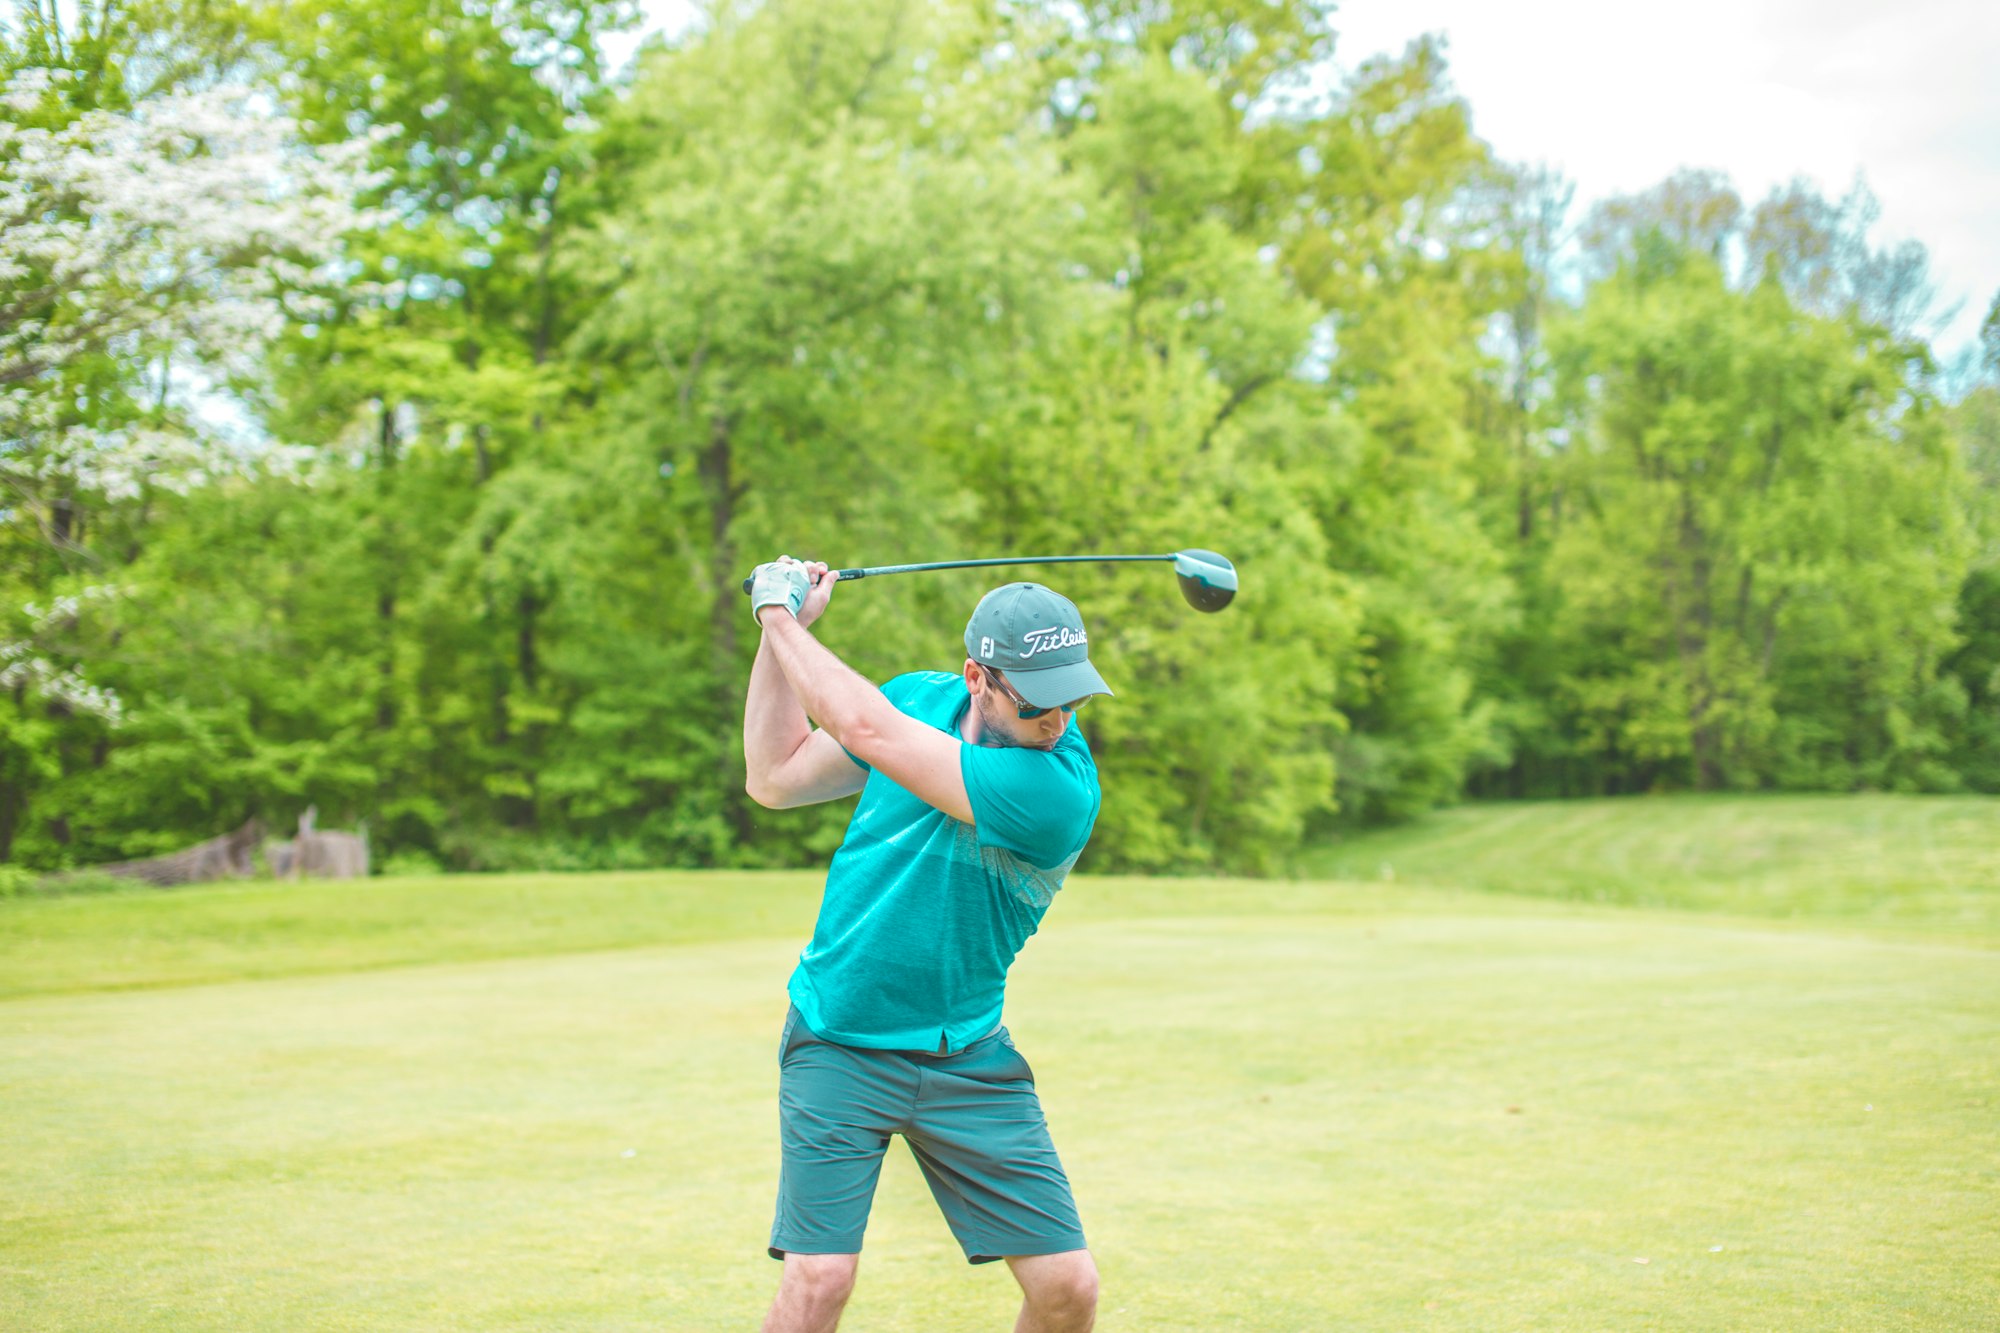 Should a beginner golfer use a driver? What golf clubs should a beginner use?